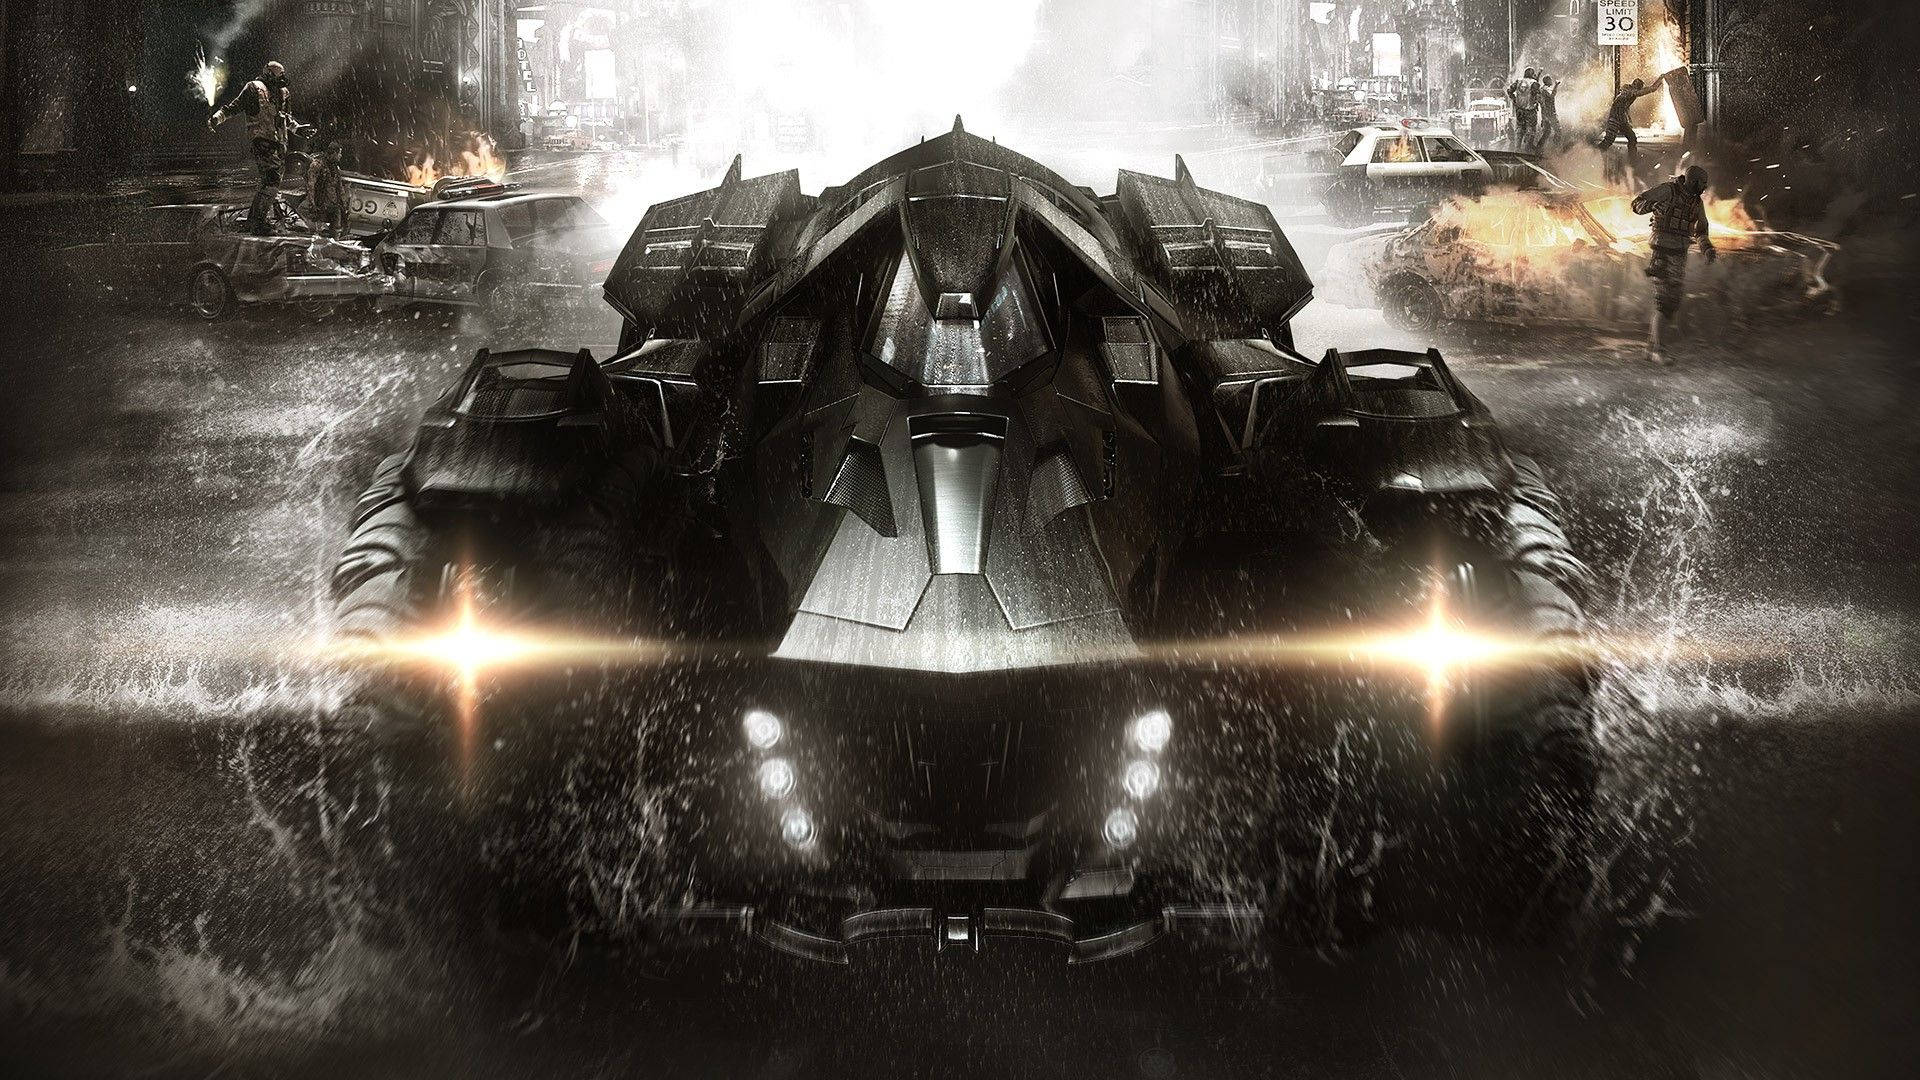 Batmobile Splashed With Water Wallpaper